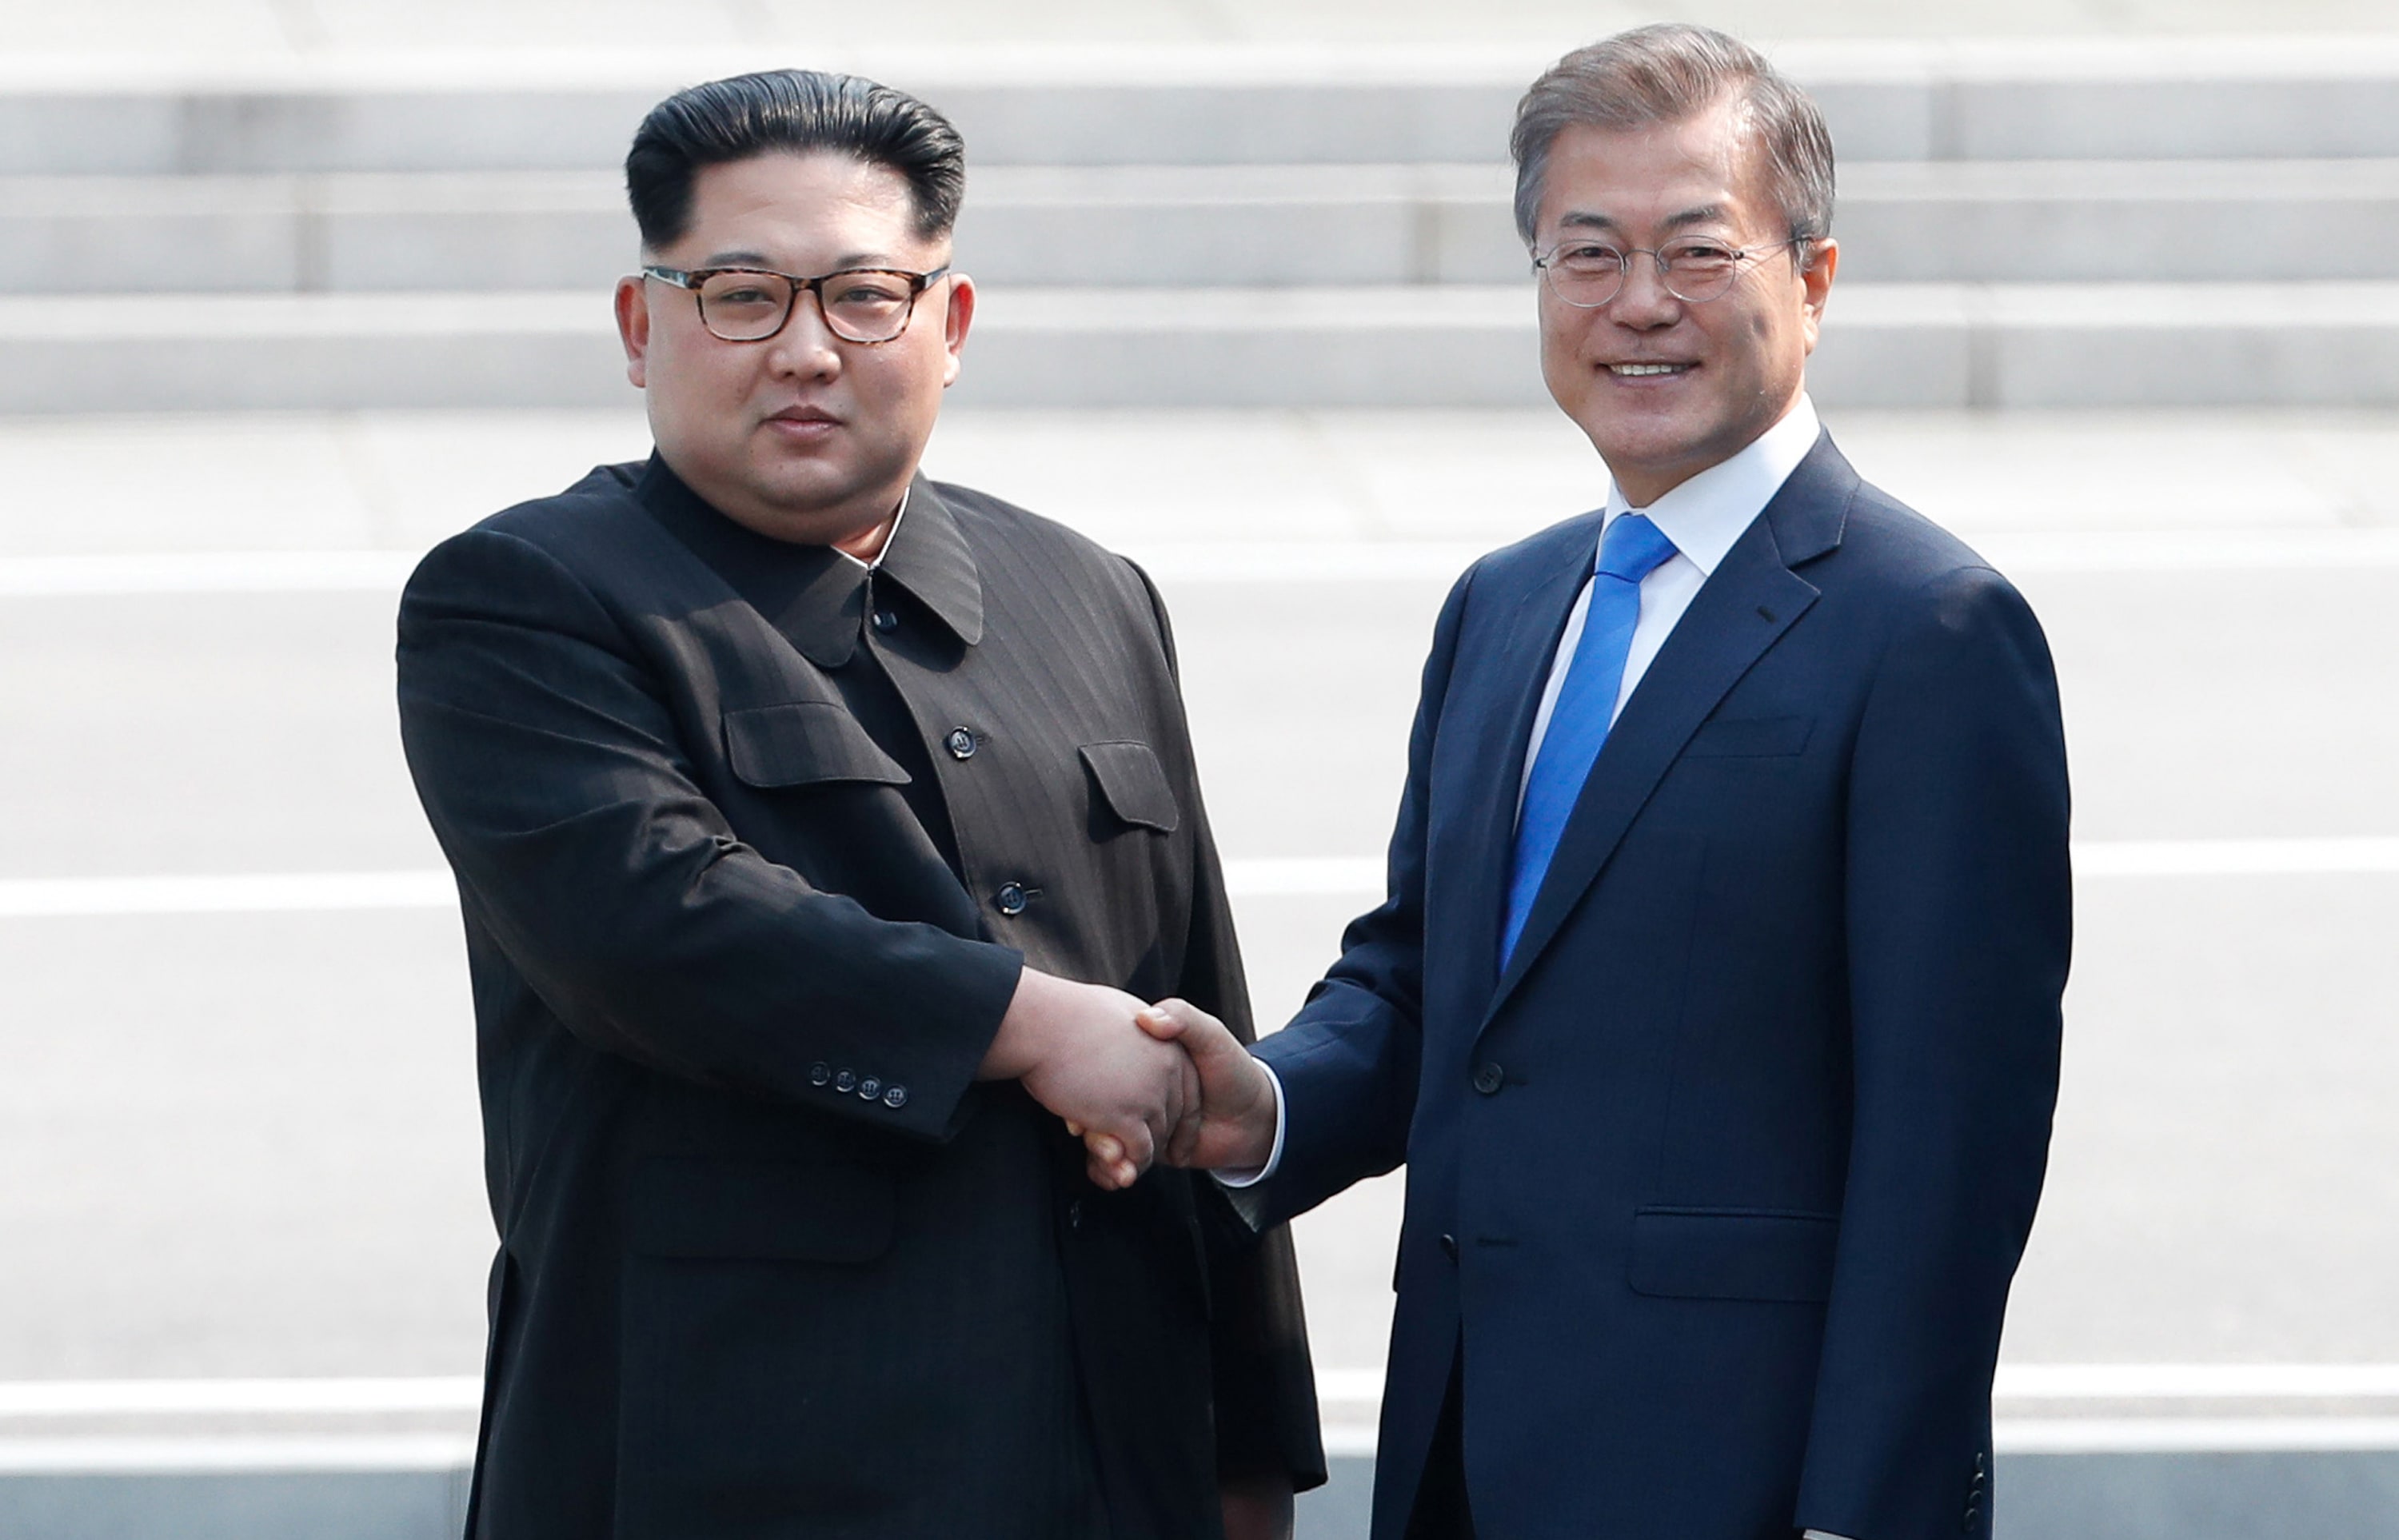 North Korea's leader Kim Jong Un shakes hands with South Korea's President Moon Jae-in at the Military Demarcation Line.